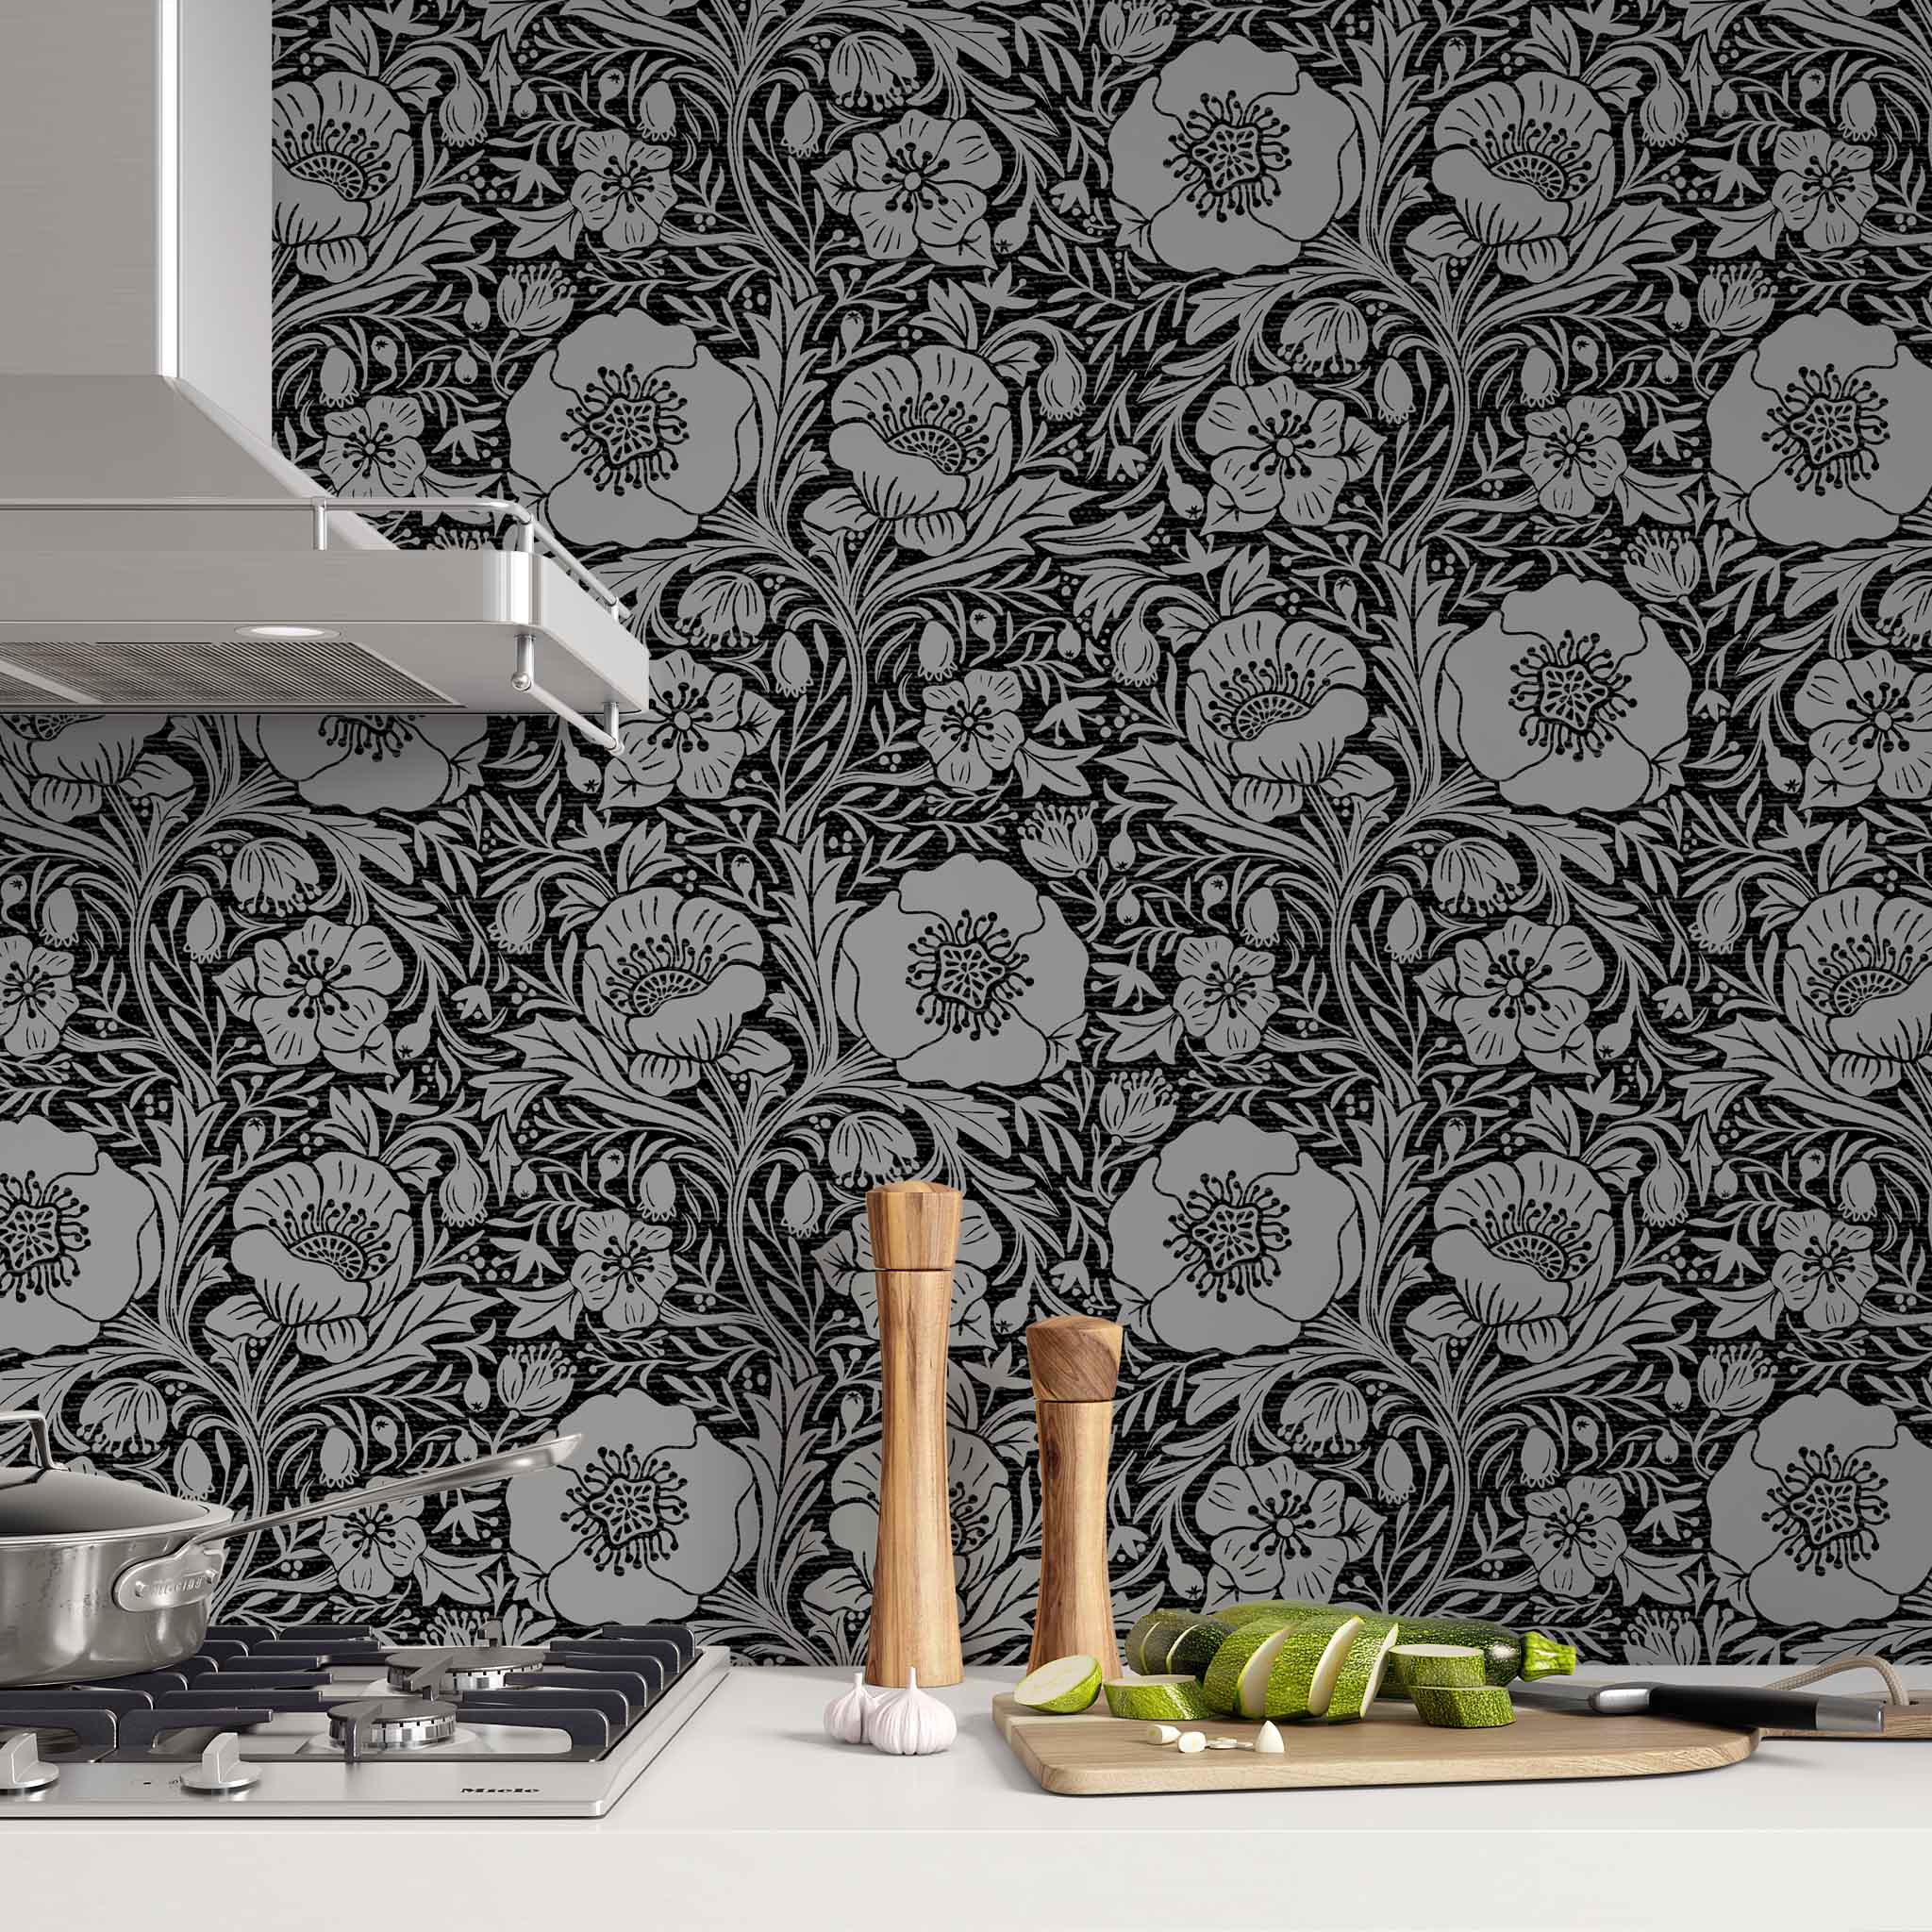 Poppy Pattern on Black Pre-Pasted Removable Wallpaper. A Great Solution to a Backsplash.